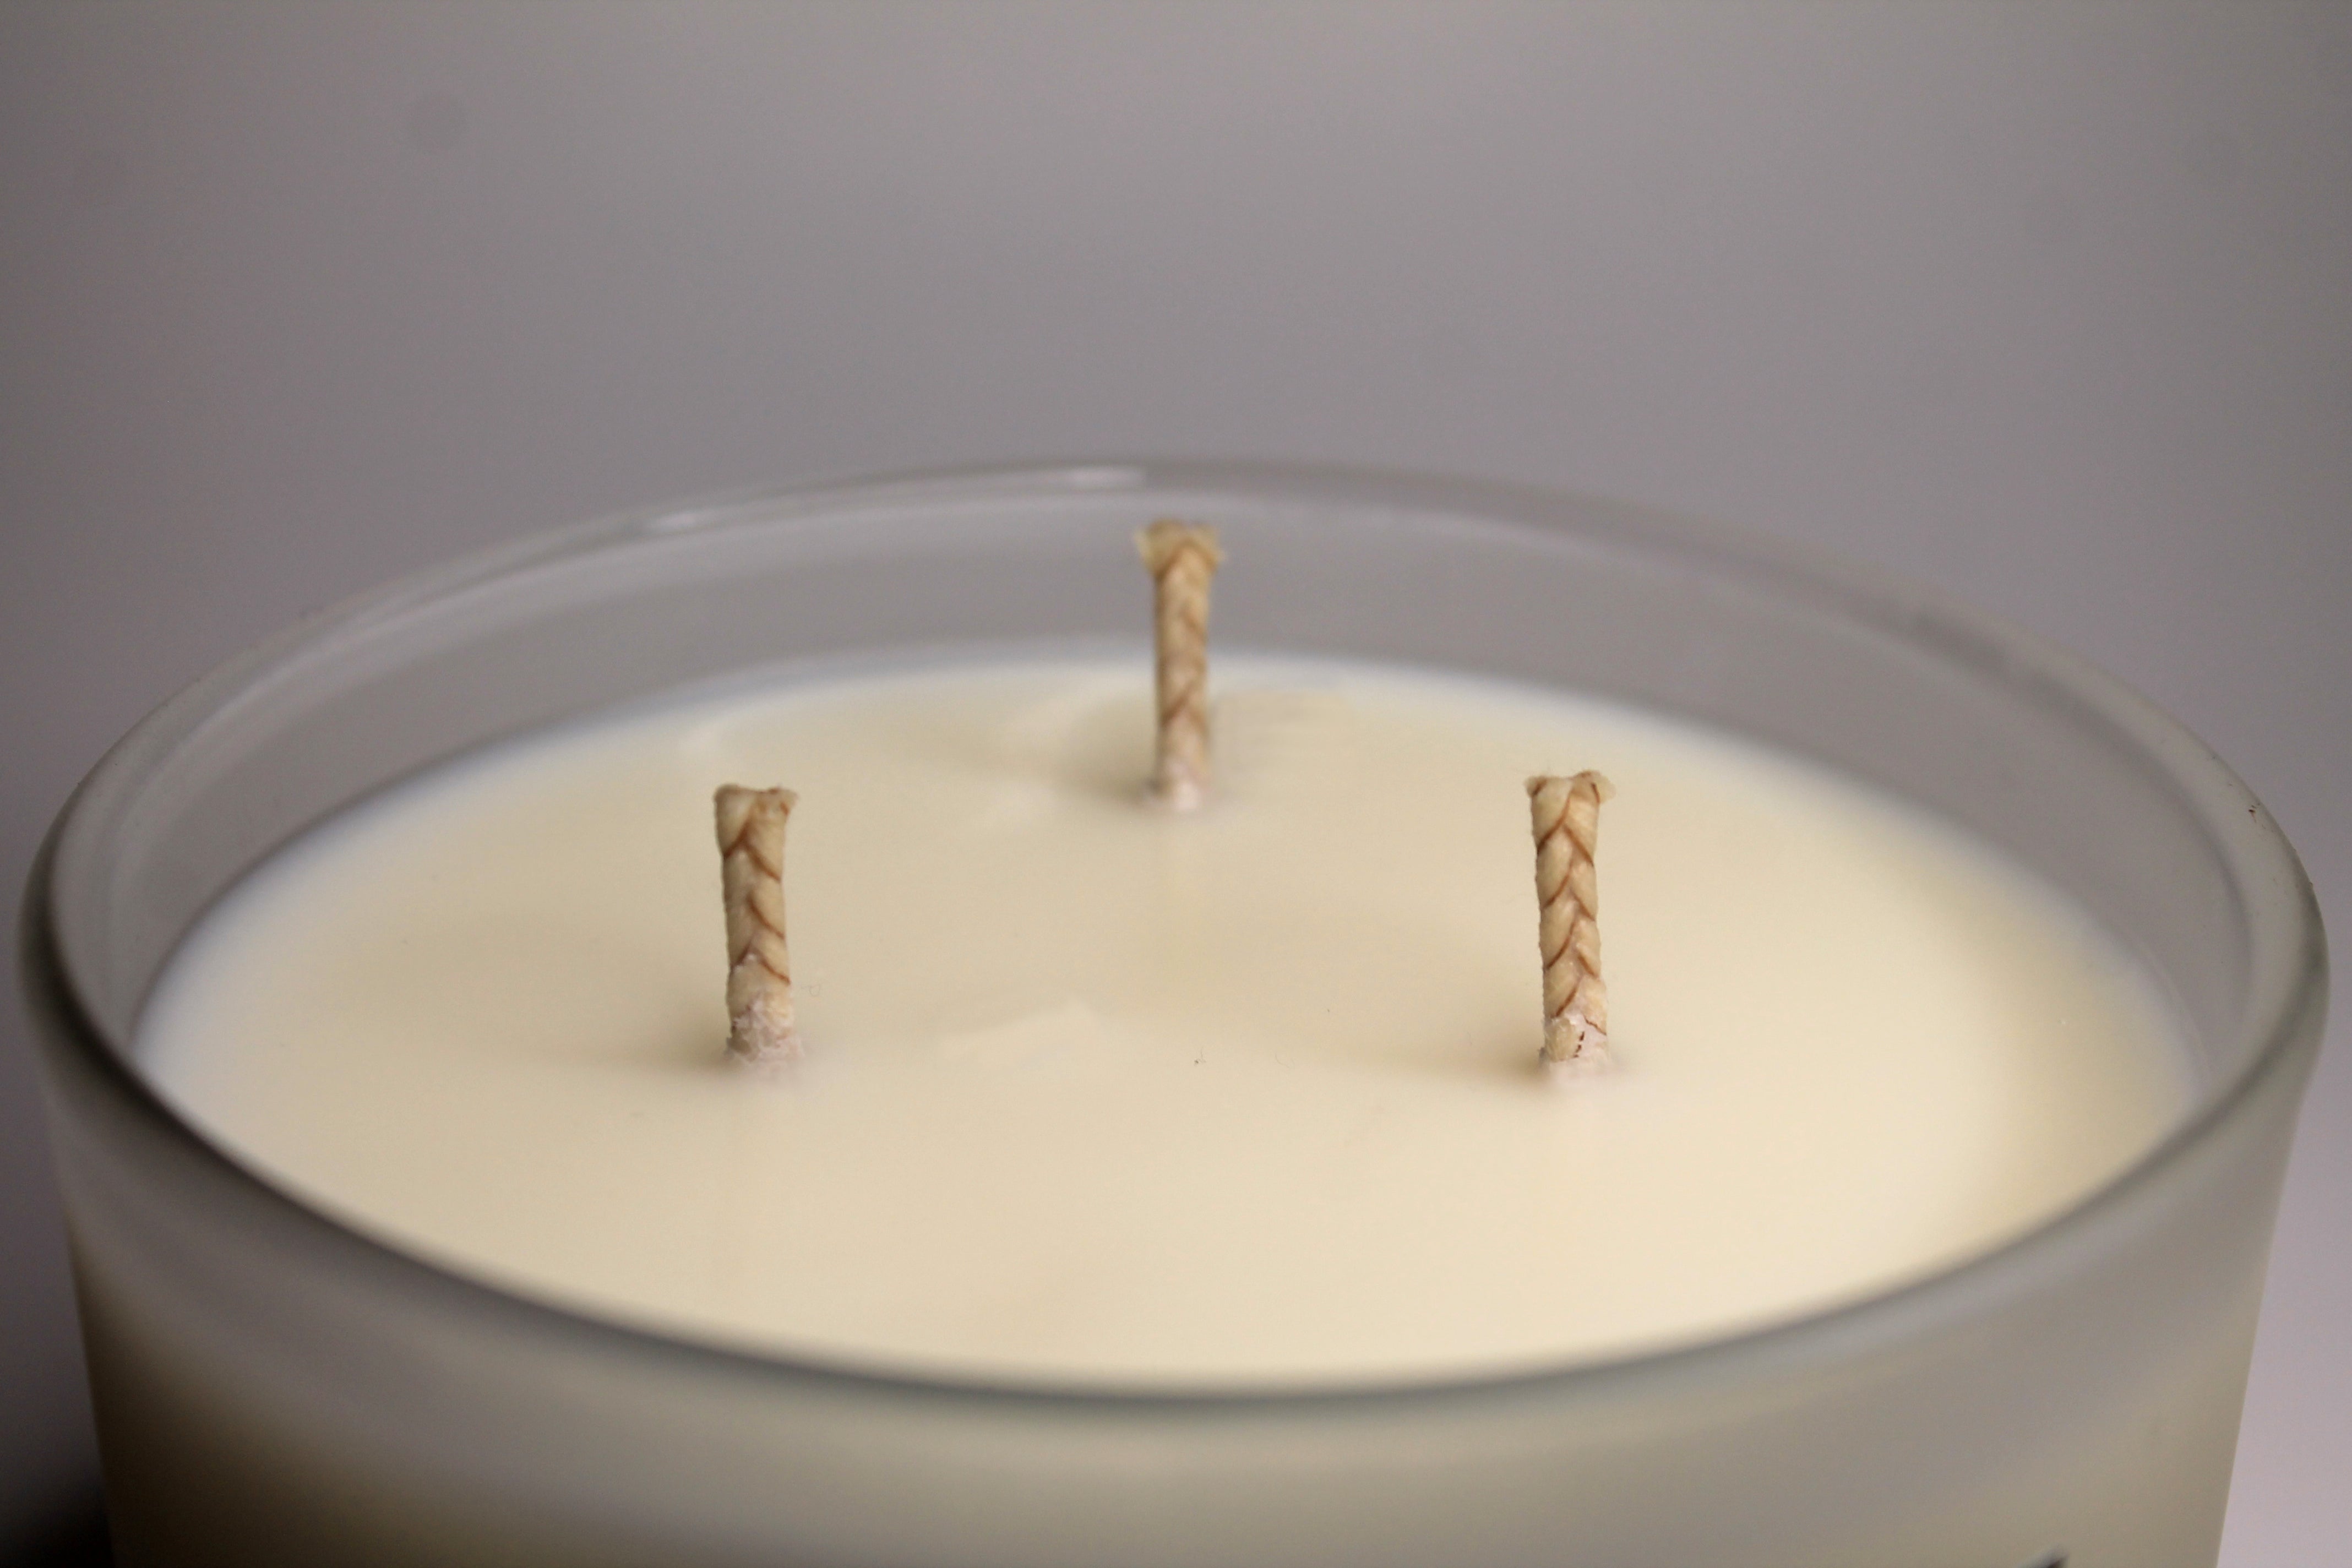 Our 15 ounce candles are made with 3 cotton wicks. 